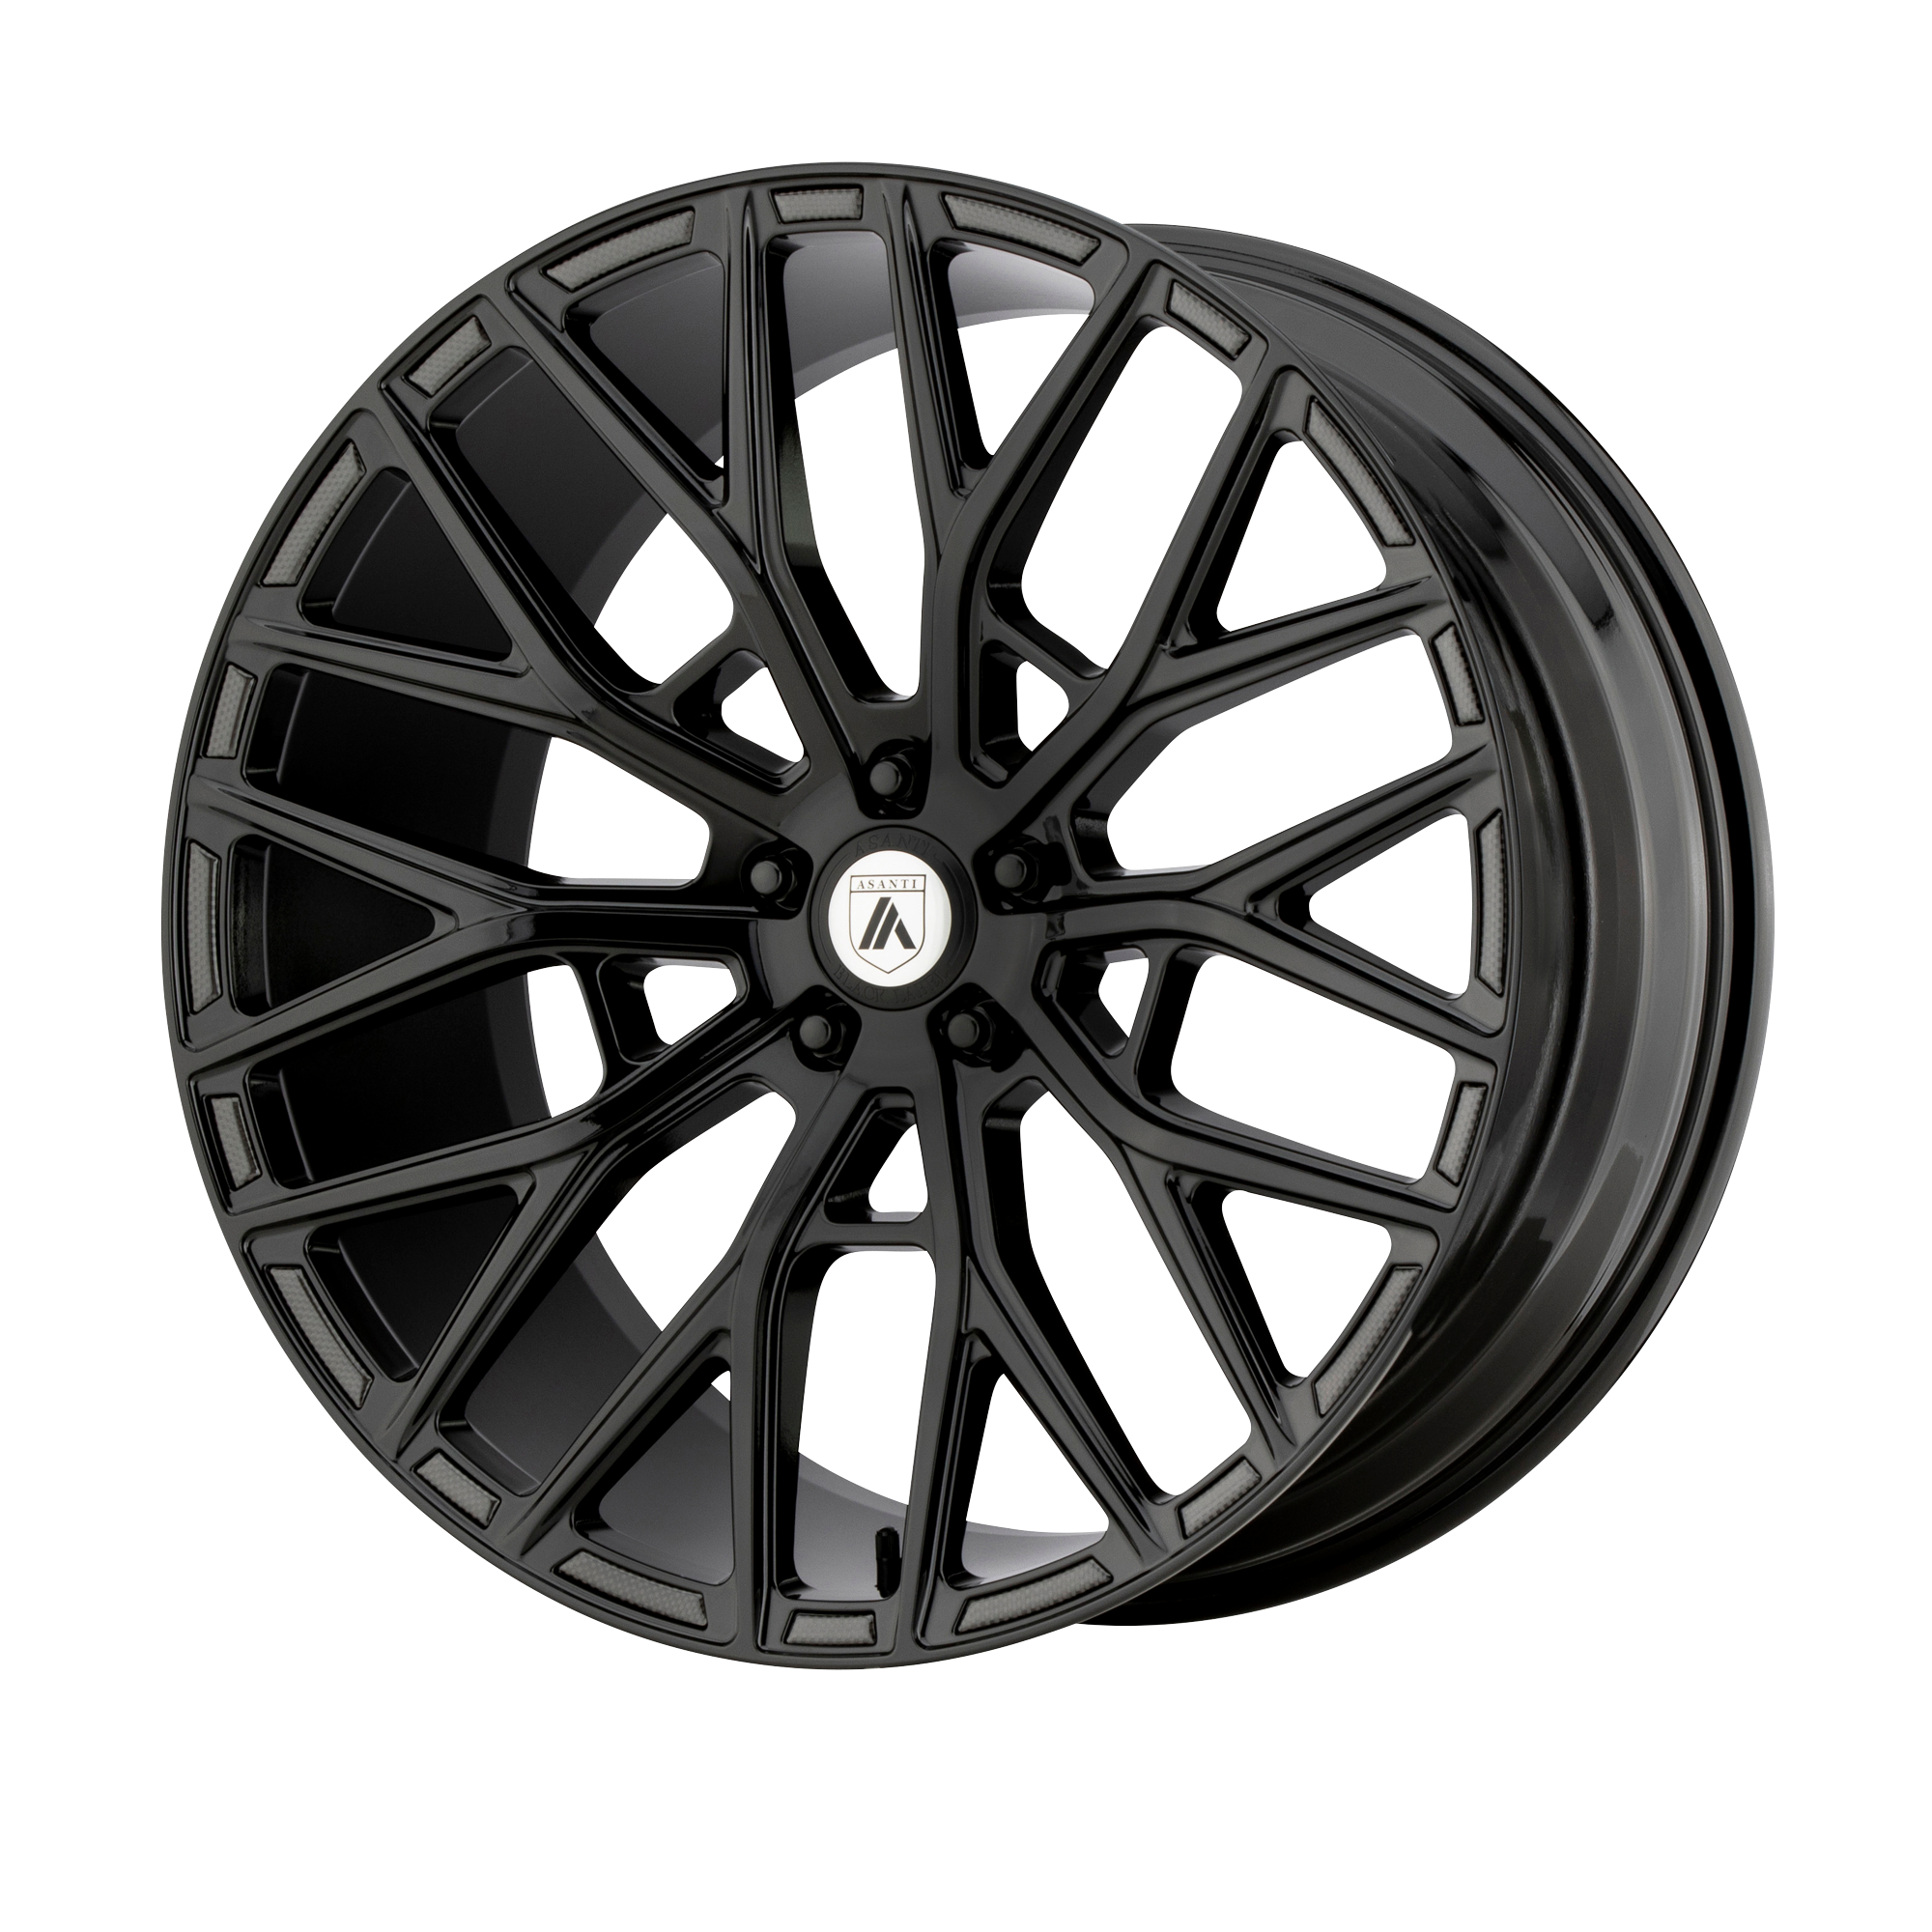 LEO 20x10.5 Blank GLOSS BLACK (20 mm) - Tires and Engine Performance